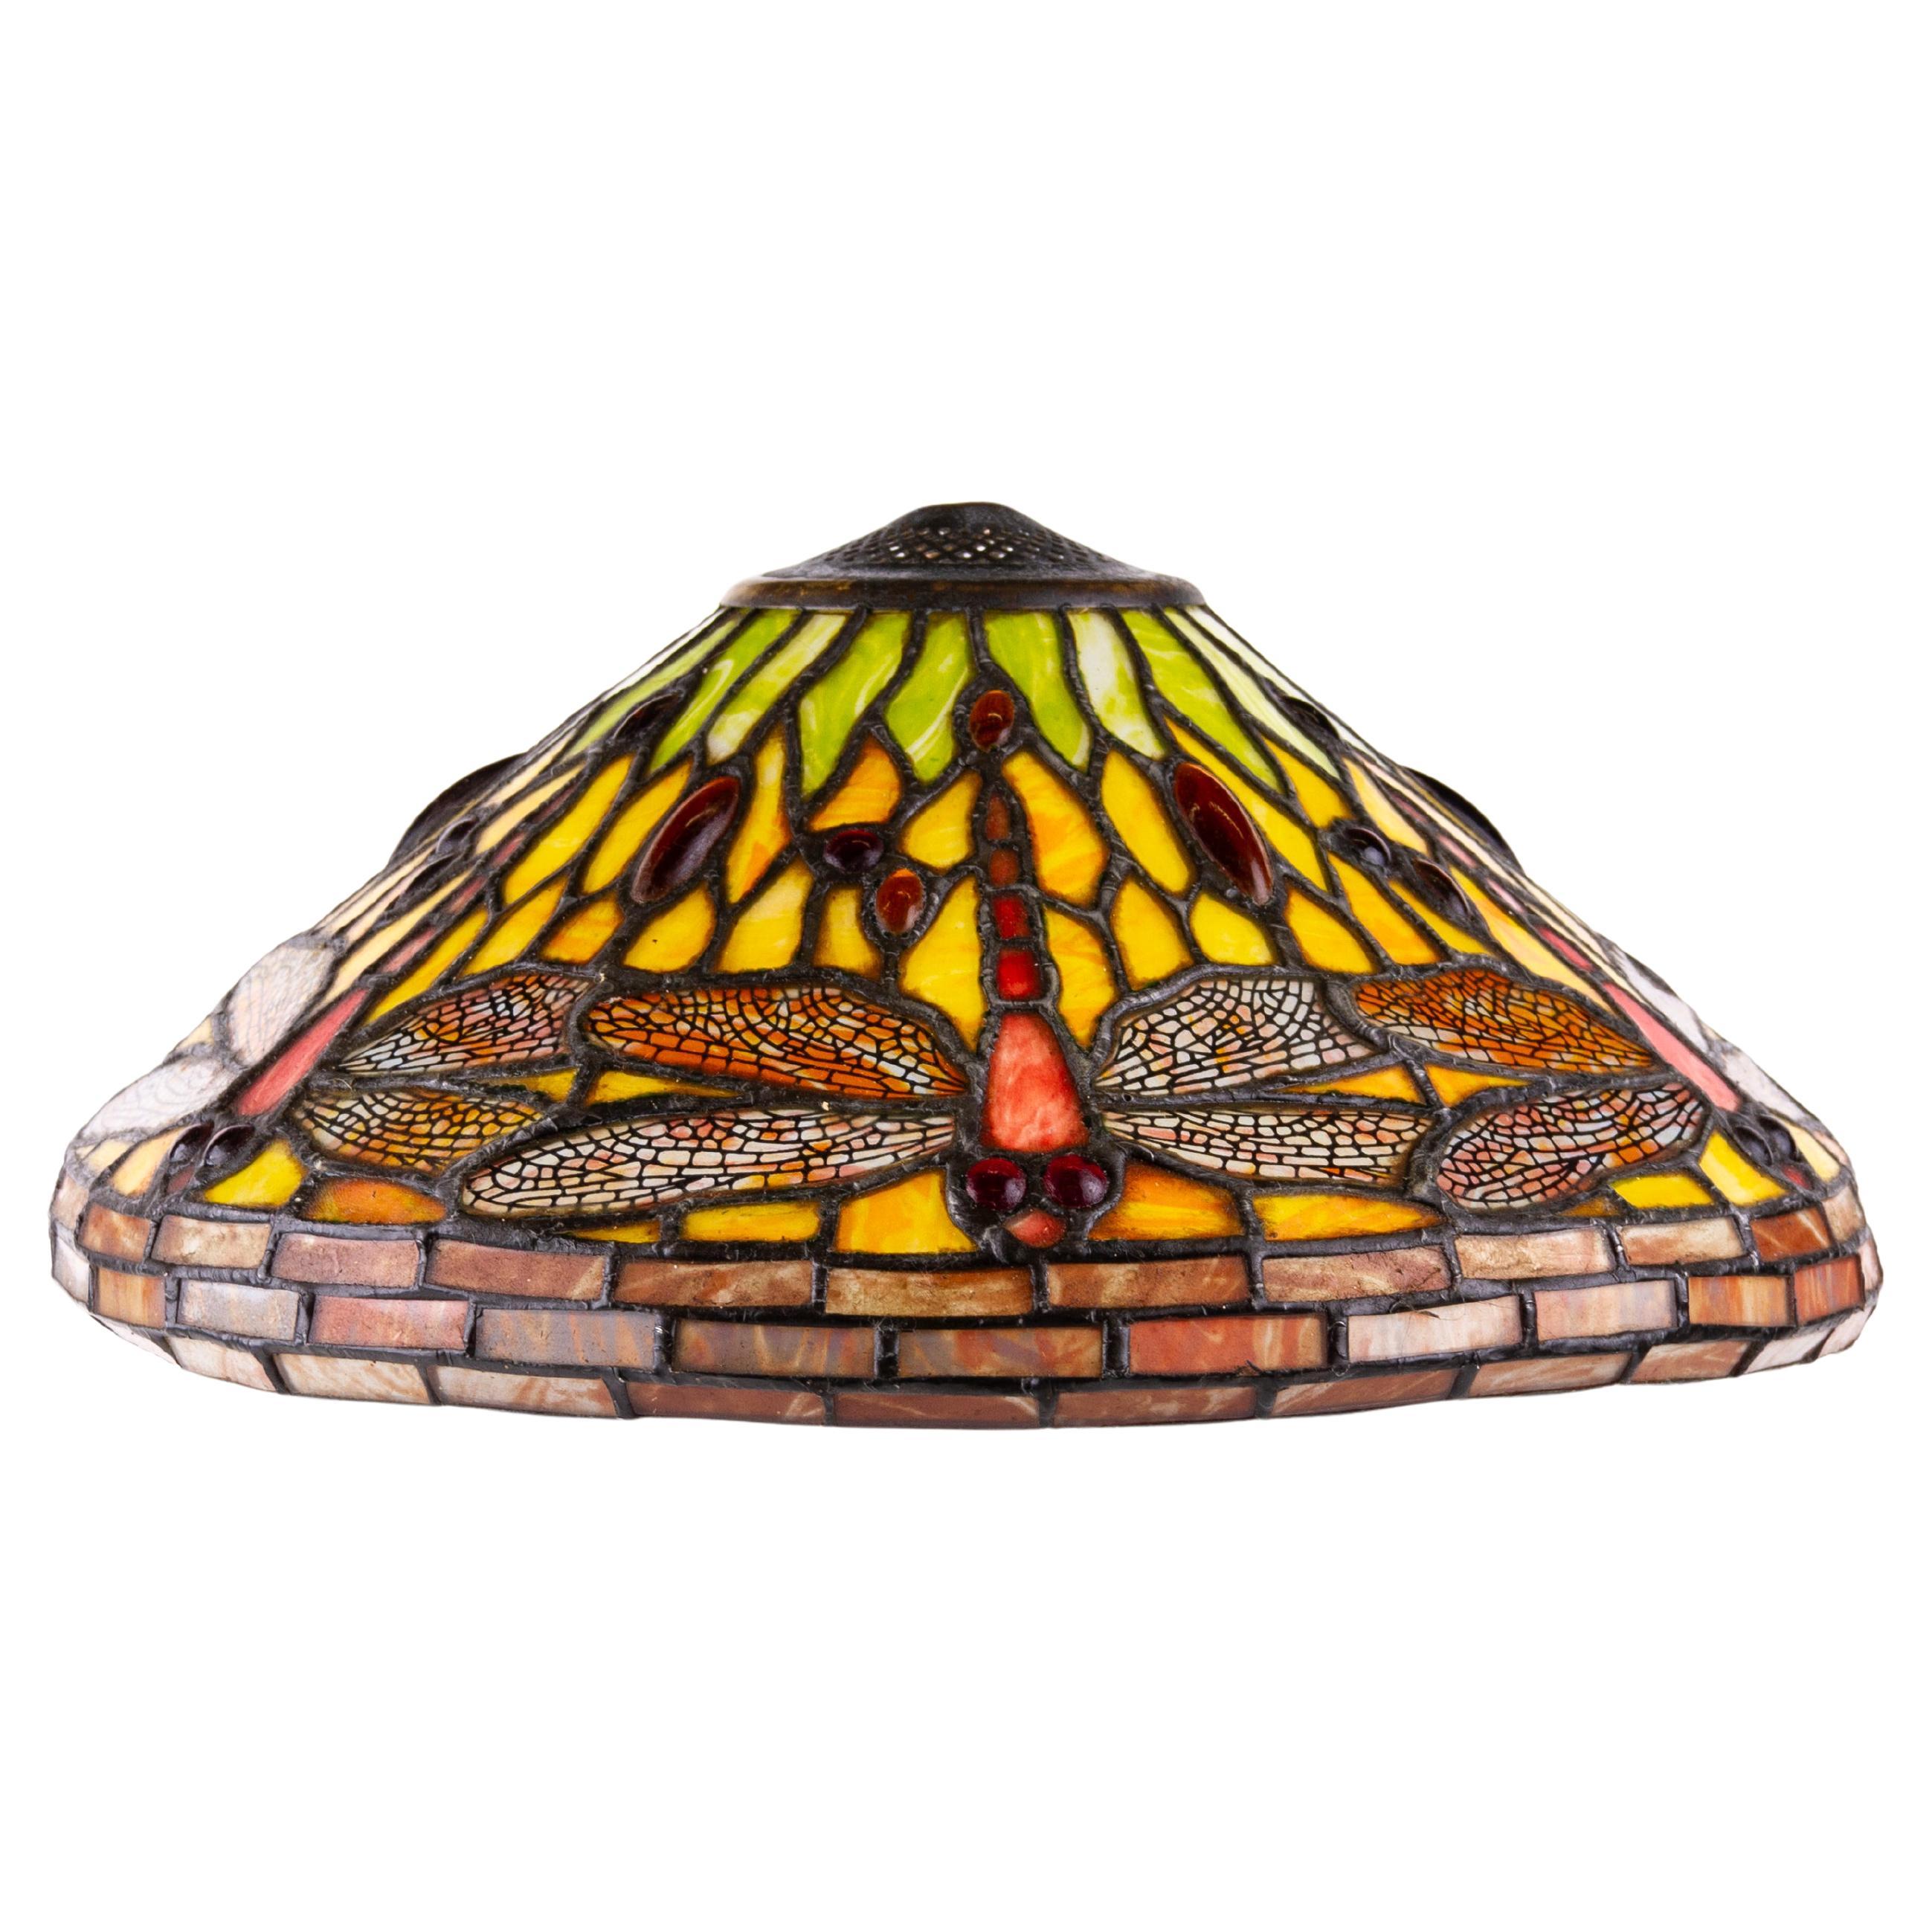 Tiffany Style Stained-Glass Dragonfly Lamp Shade 